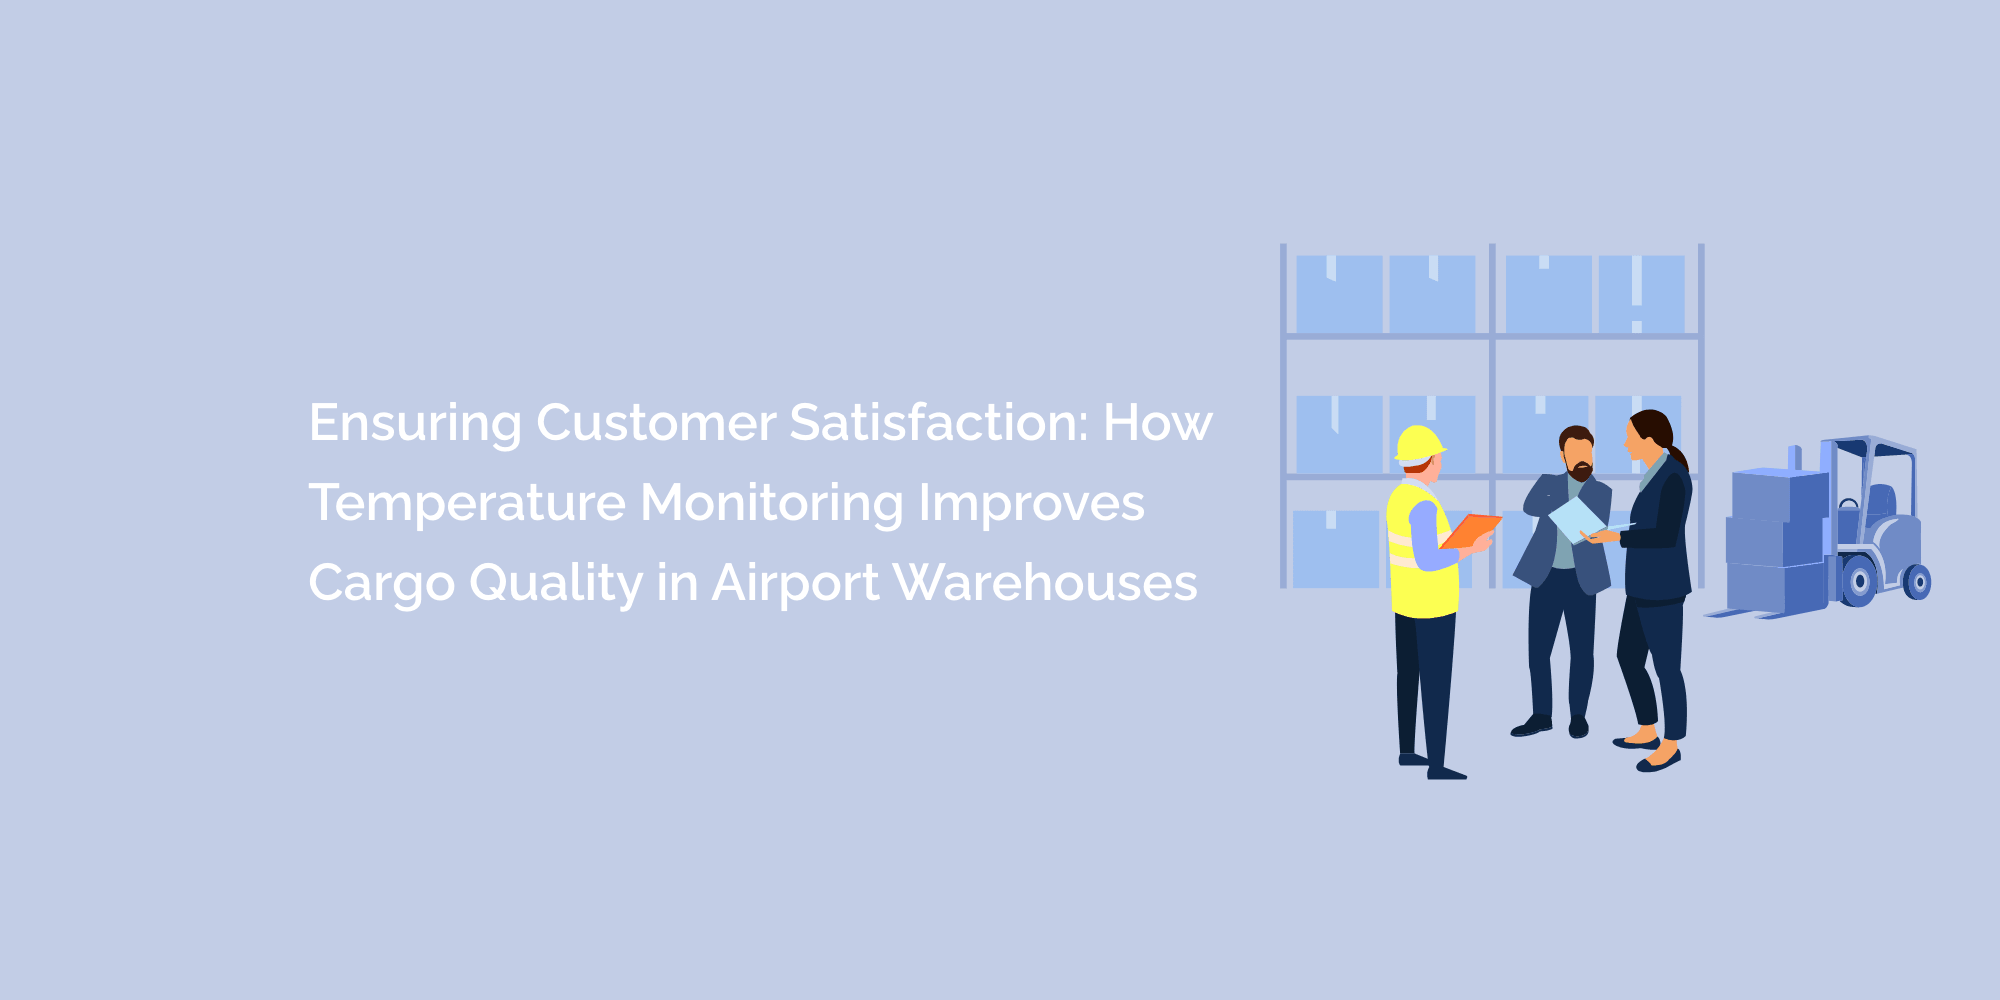 Ensuring Customer Satisfaction: How Temperature Monitoring Improves Cargo Quality in Airport Warehouses